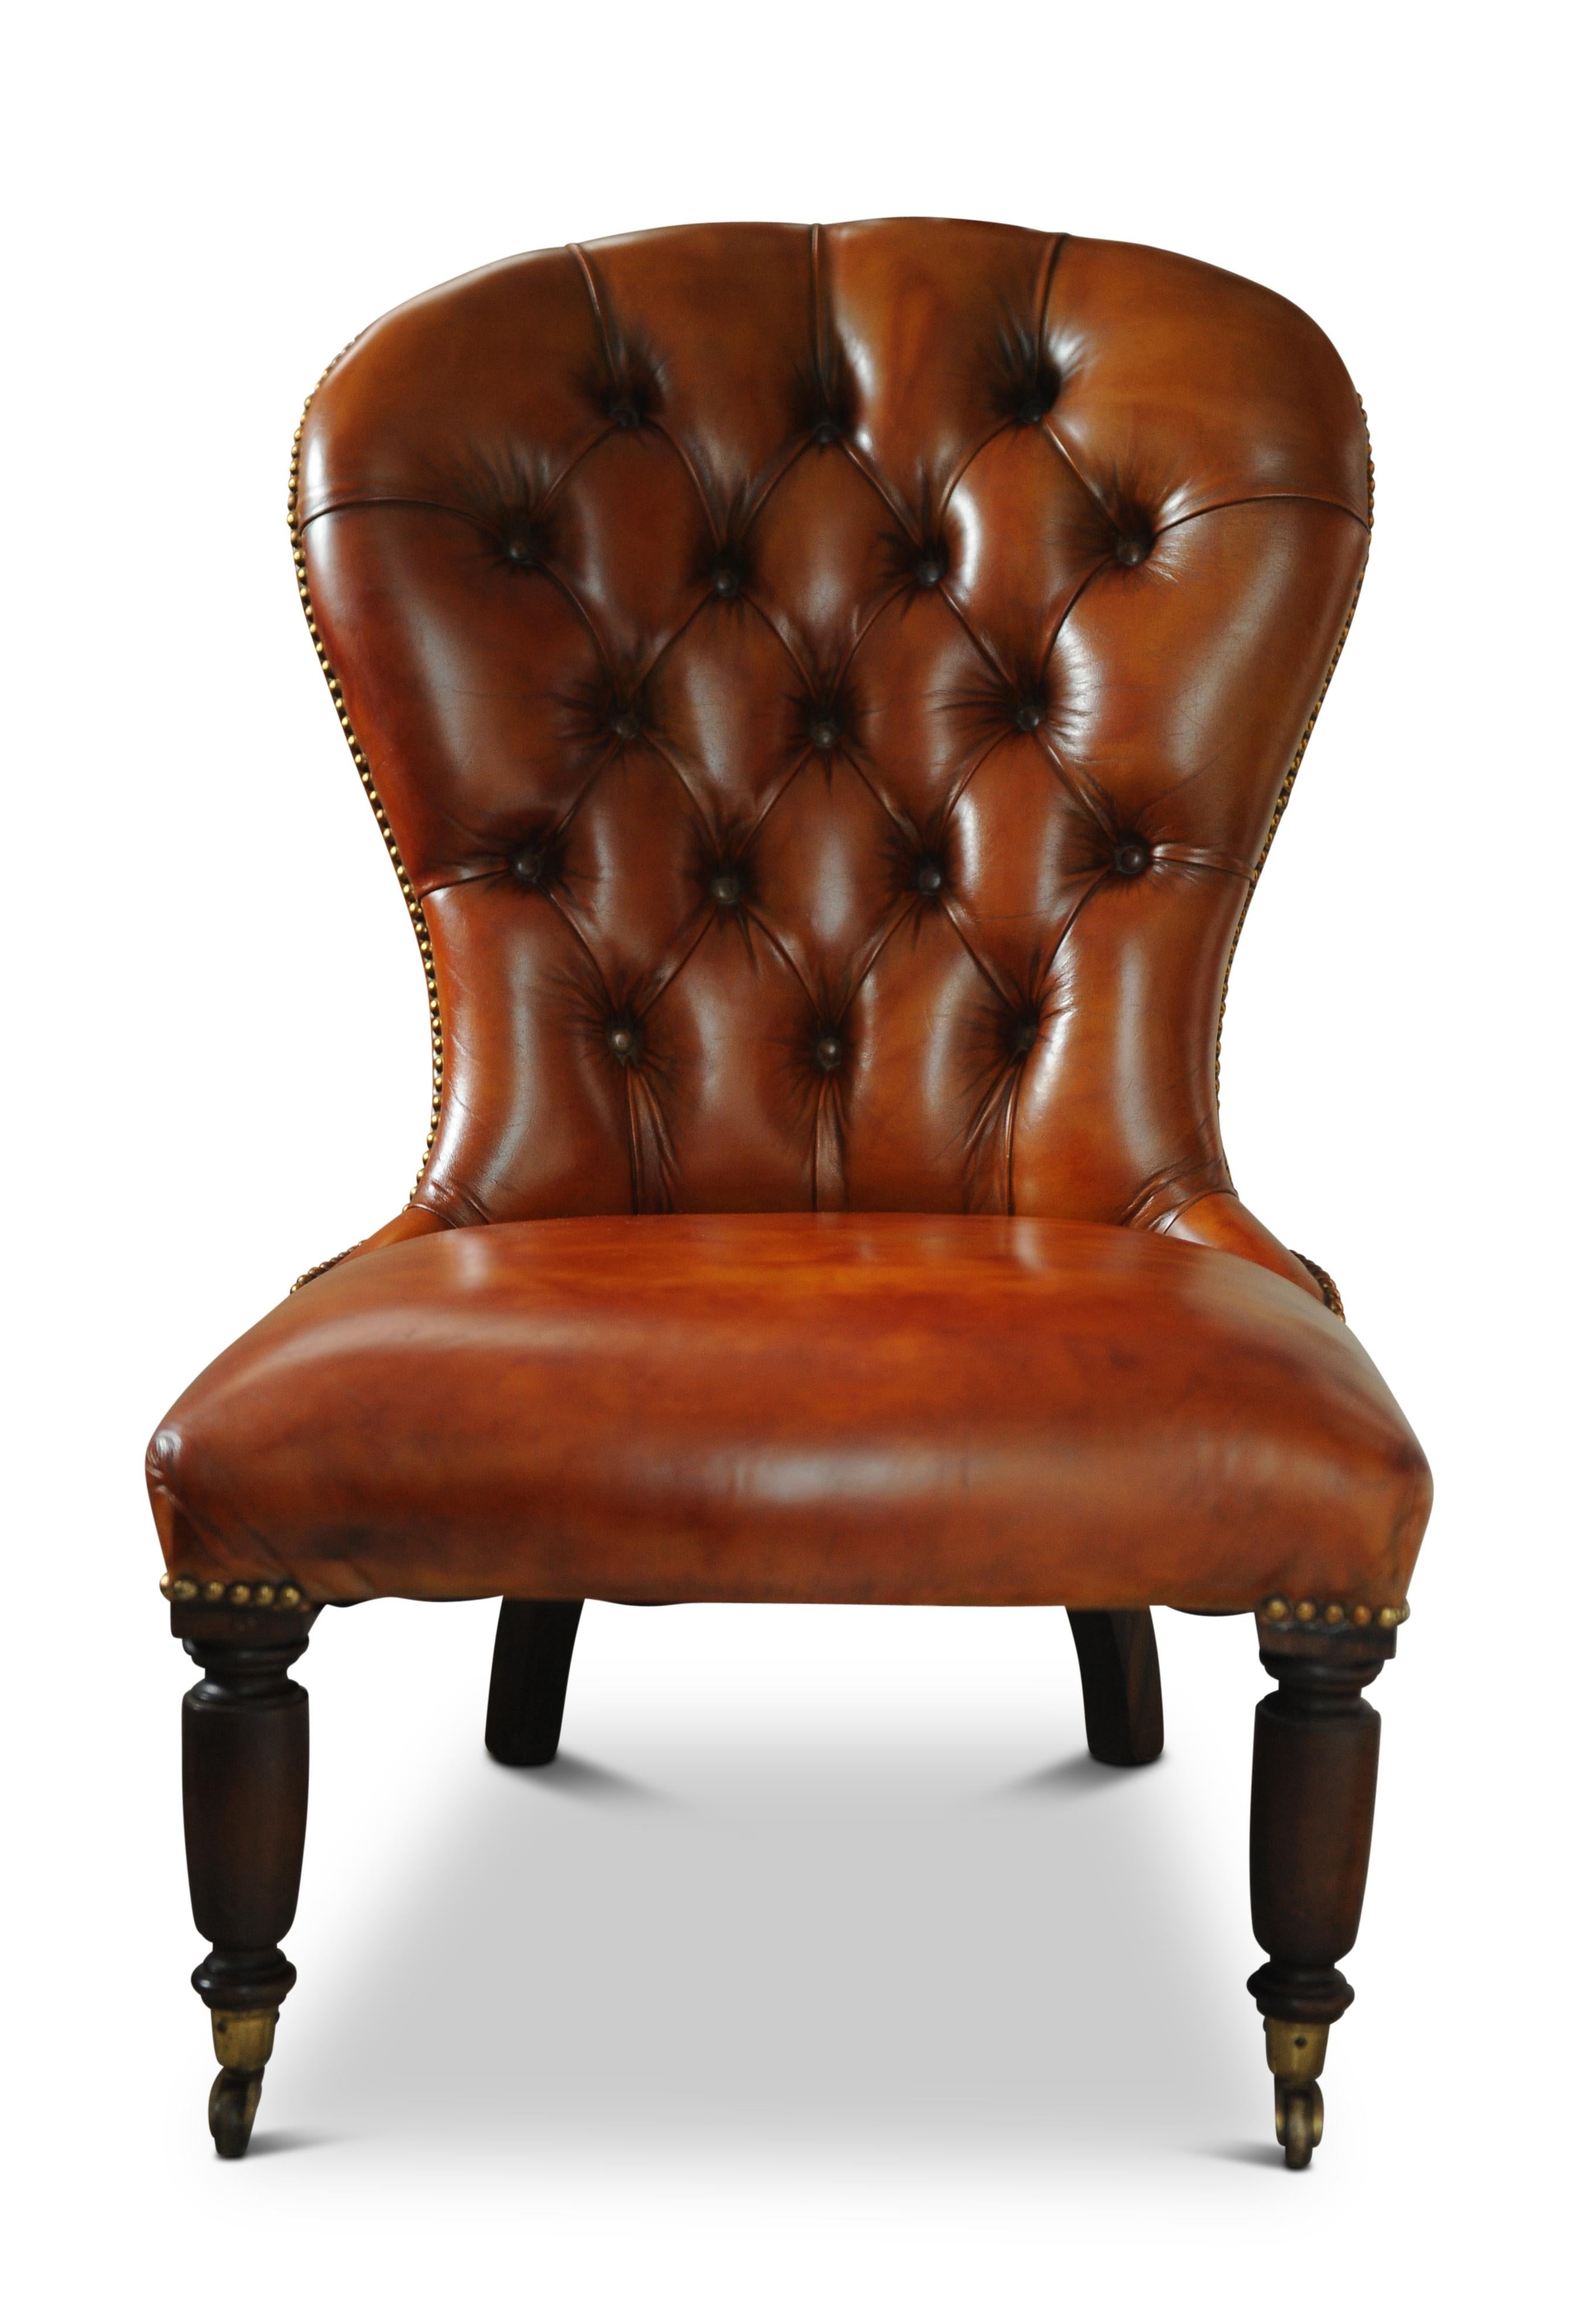 19th century polished tan leather Chesterfield Library chair with brass stud detailing on brass castors.
 